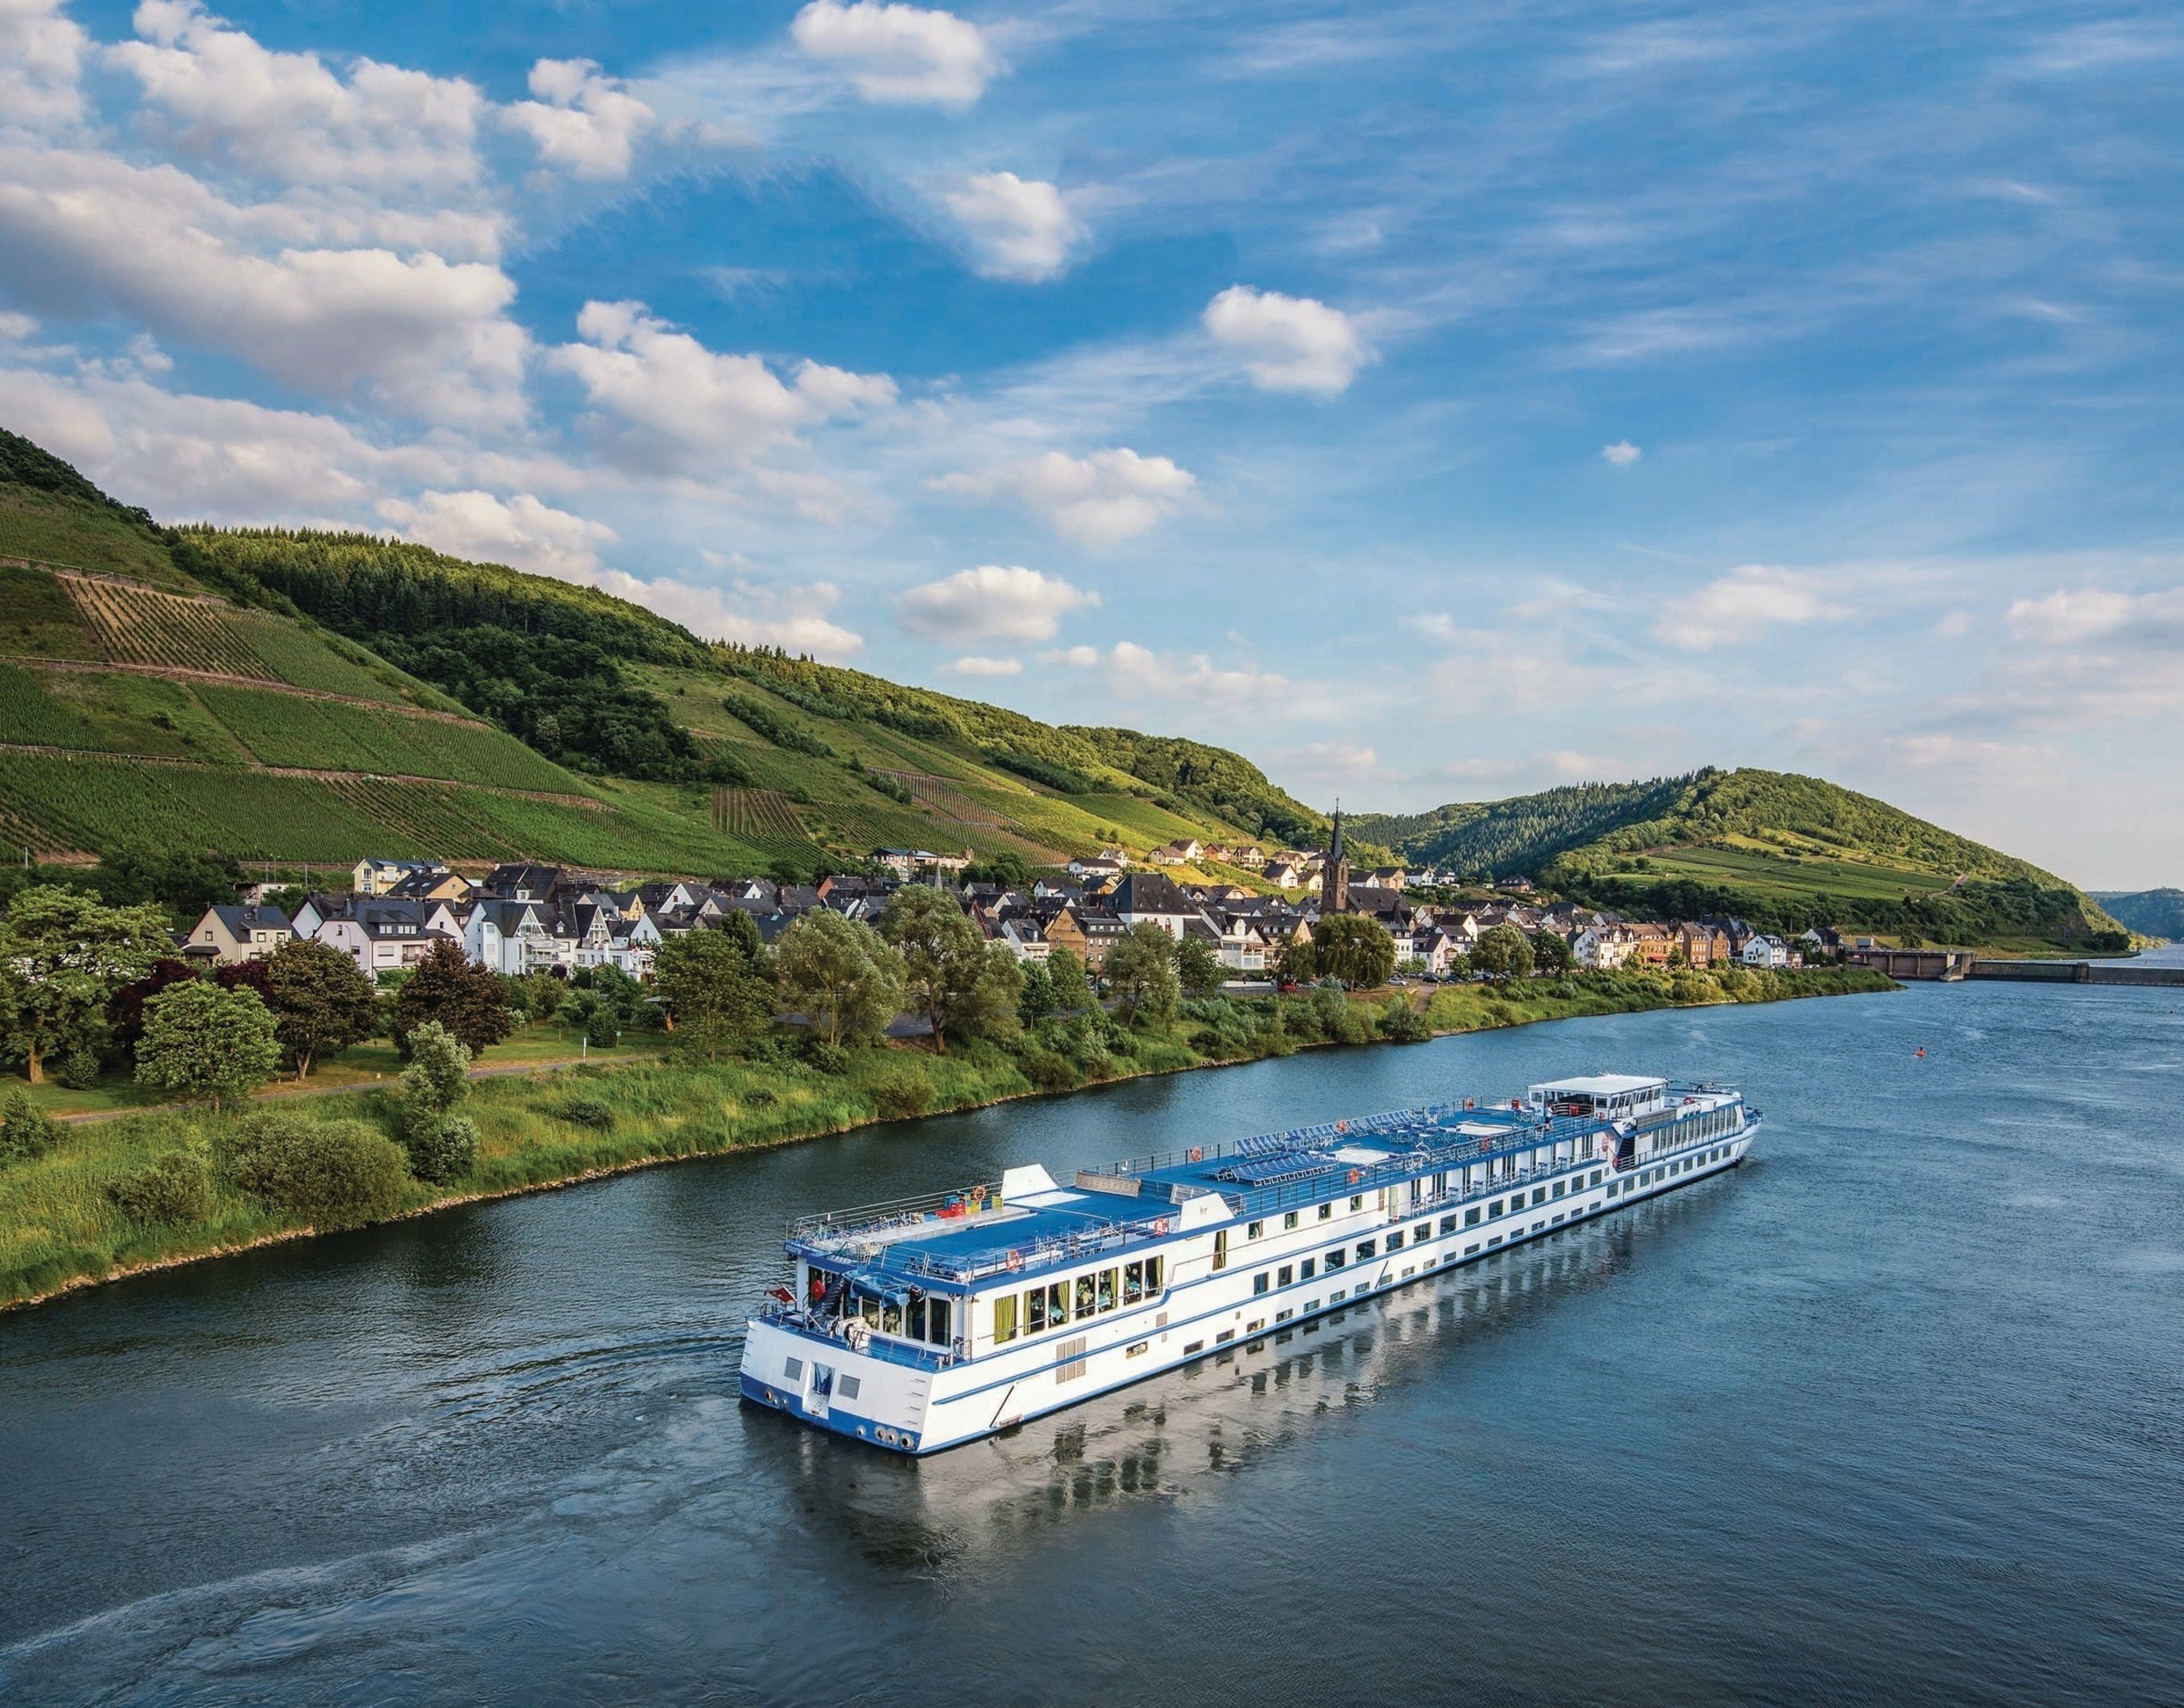 river cruises on the moselle